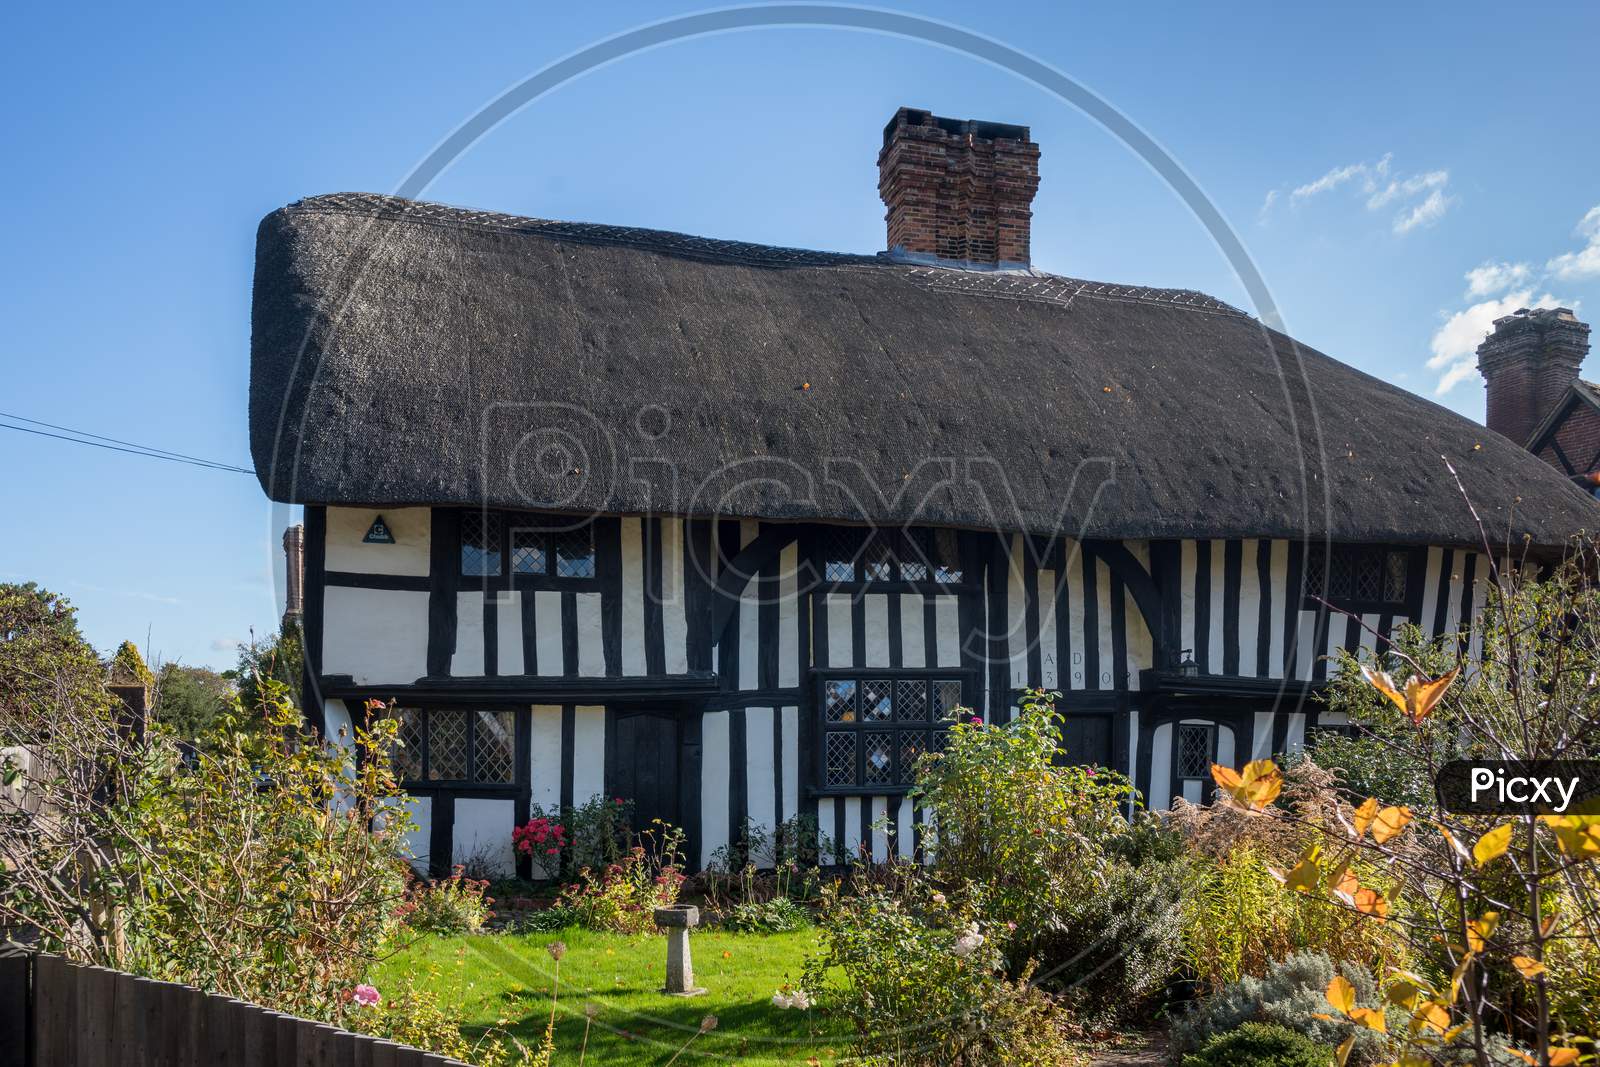 Lindfield, West Sussex/Uk -October 29 : View Of A Thatched Cottage In The Village Of Lindfield West Sussex On October 29, 2018